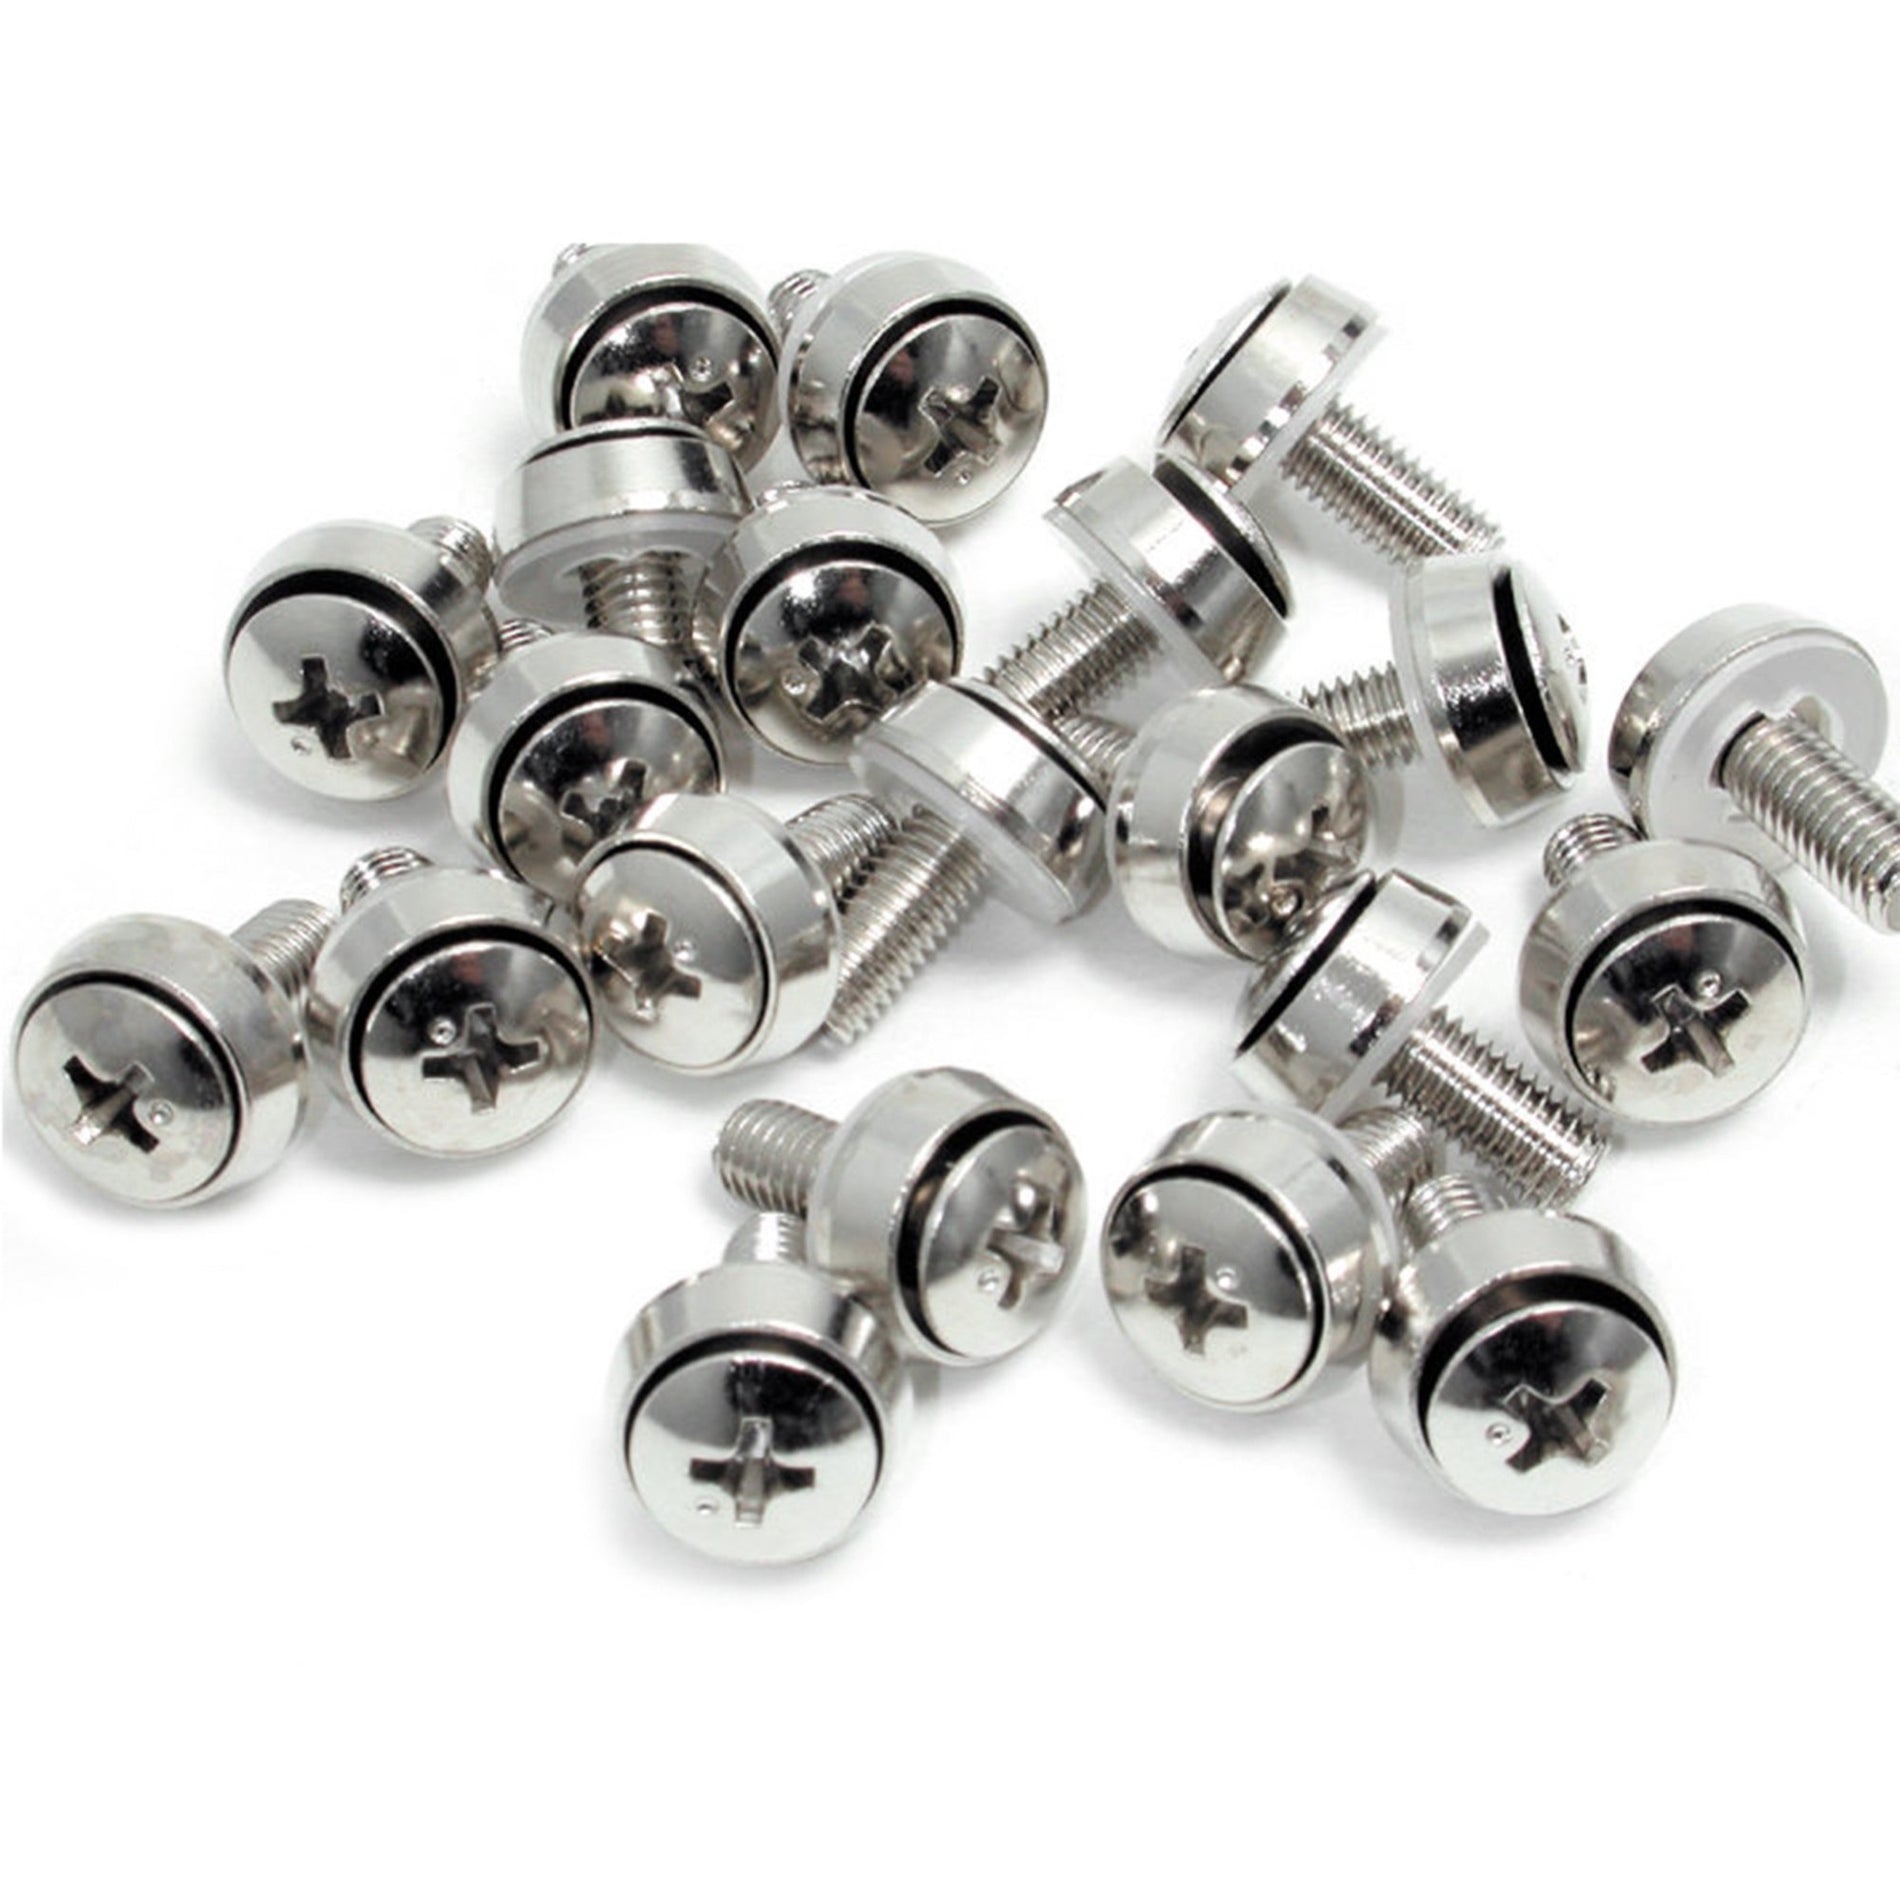 StarTech.com CABSCREWSM62 M6 x 12mm Mounting Screws - 100 Pack, Nickel Plated, TAA Compliant